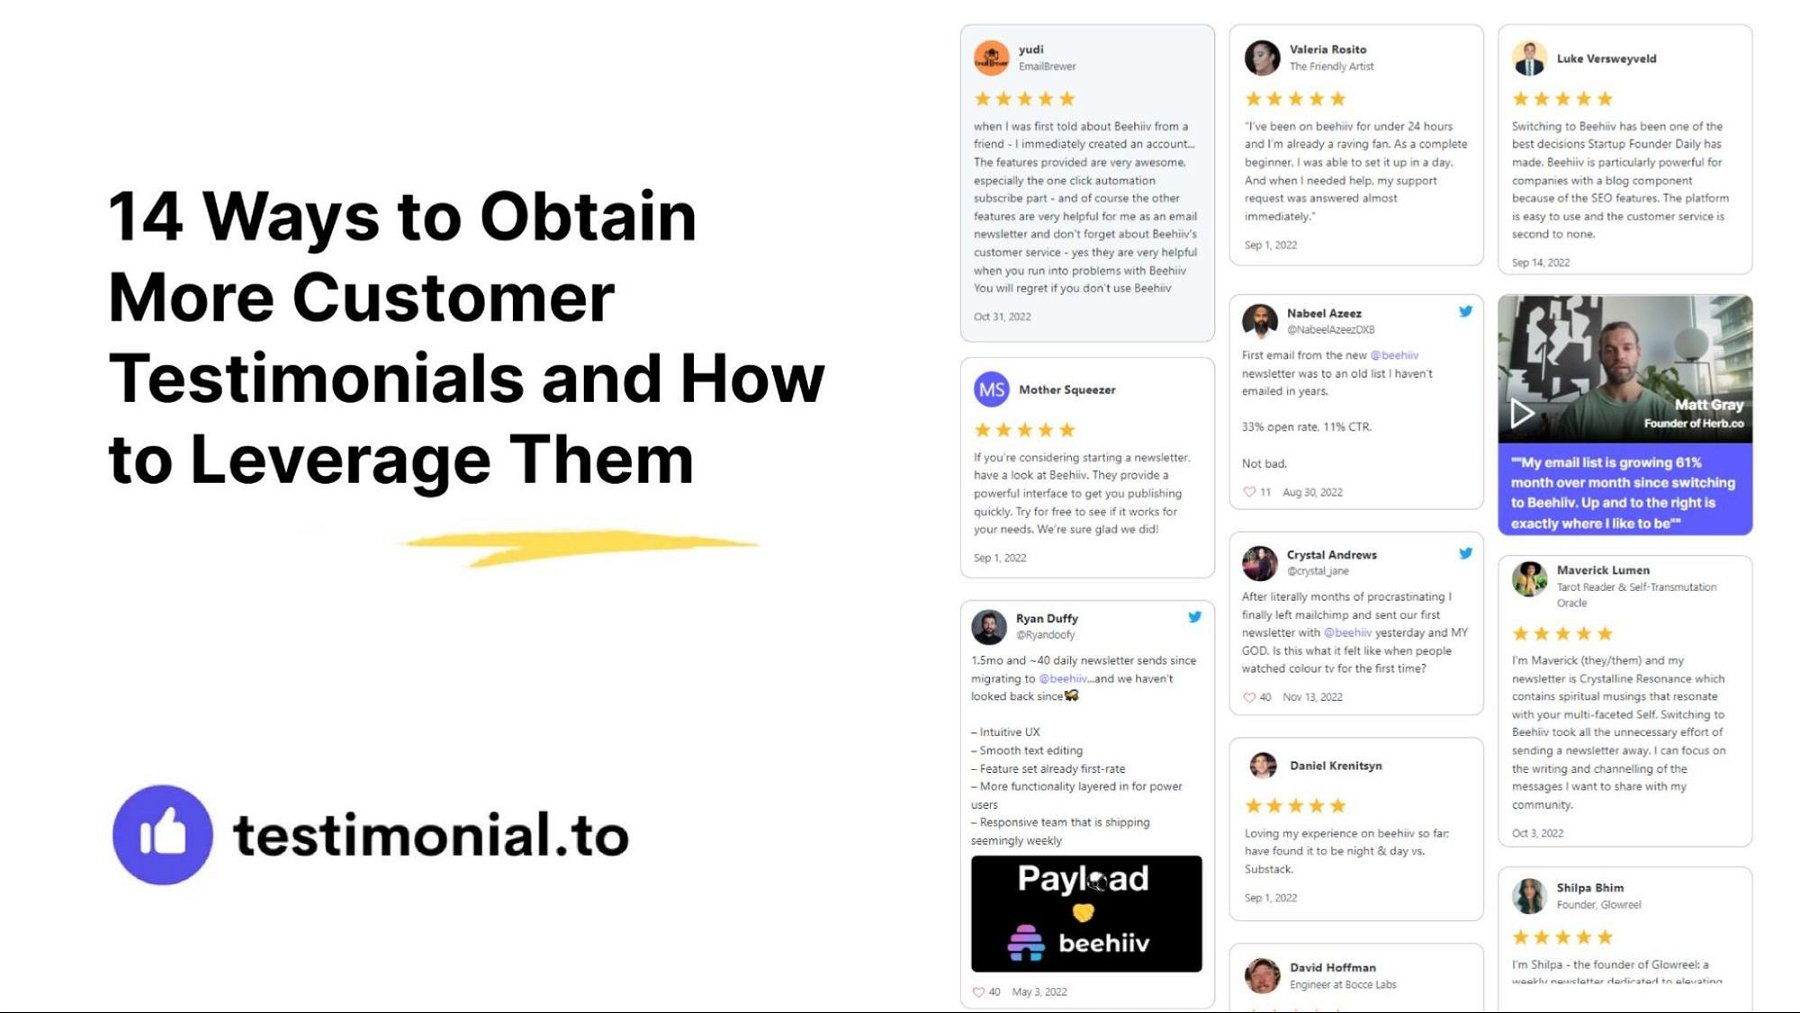 14 Ways to Obtain More Customer Testimonials and How to Leverage Them